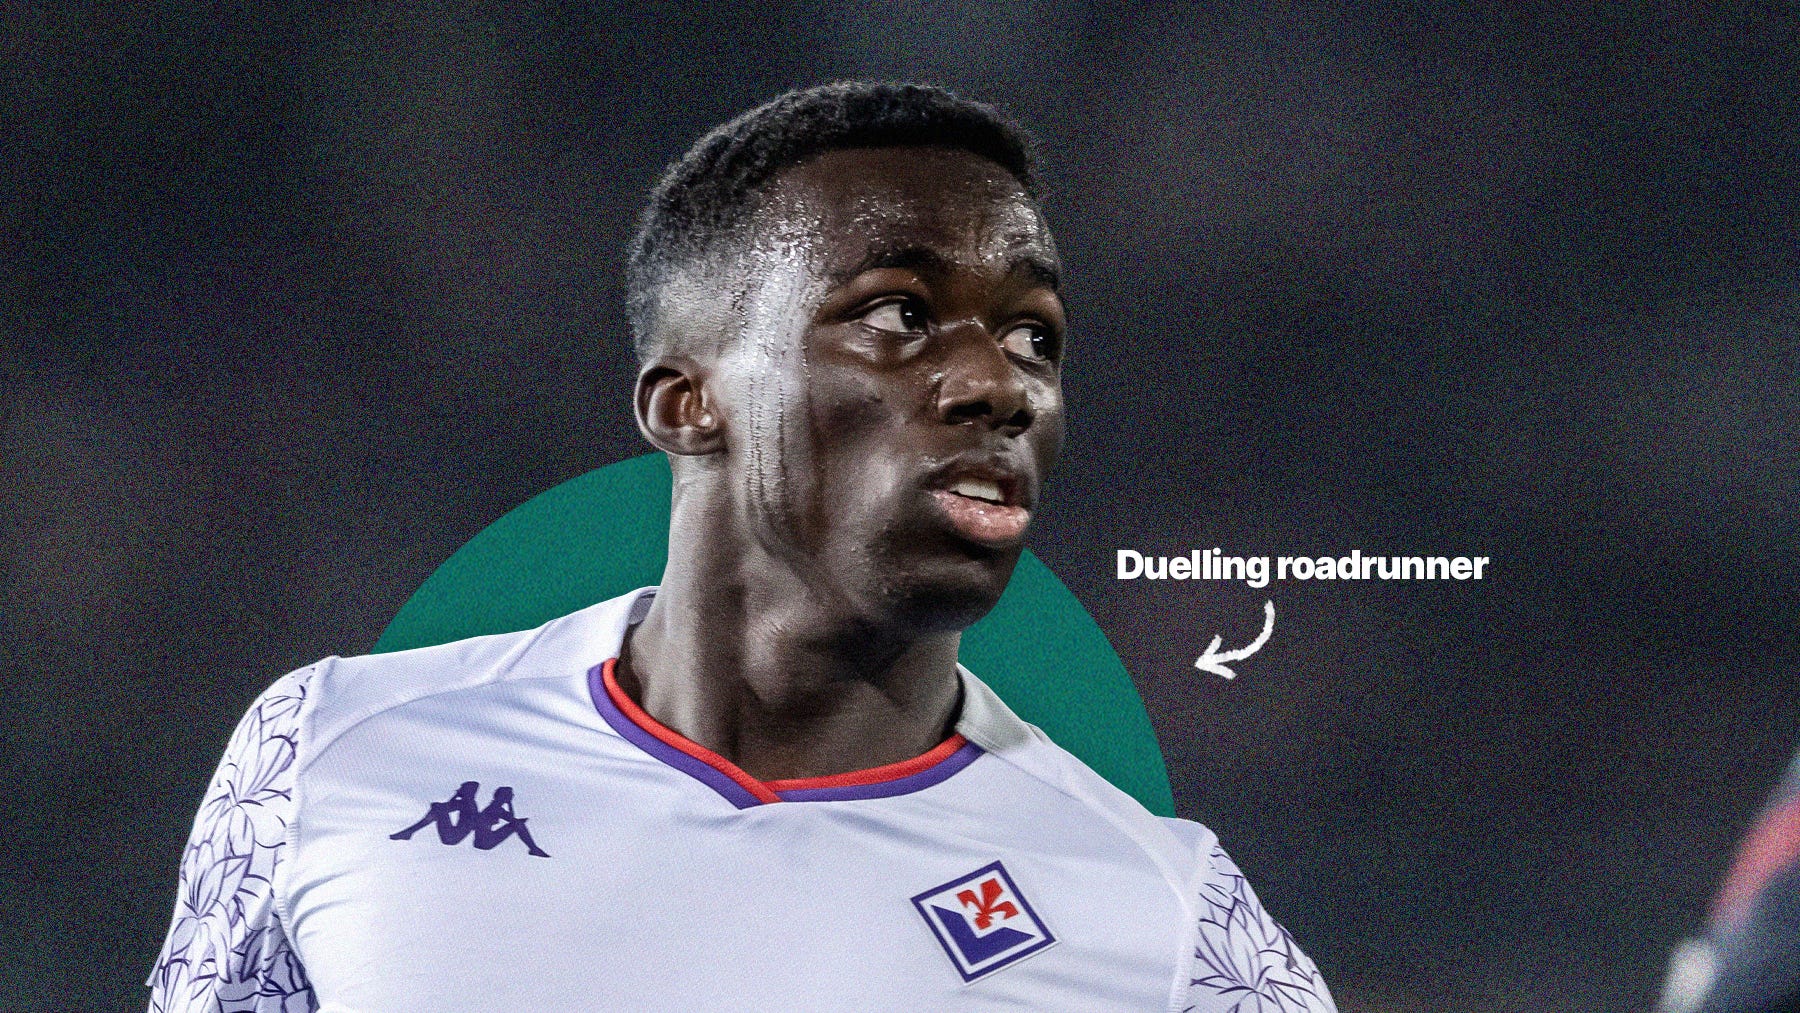 A photo of Michael Kayode wearing a white Fiorentina kit with purple trim set against a dark, blurred background.